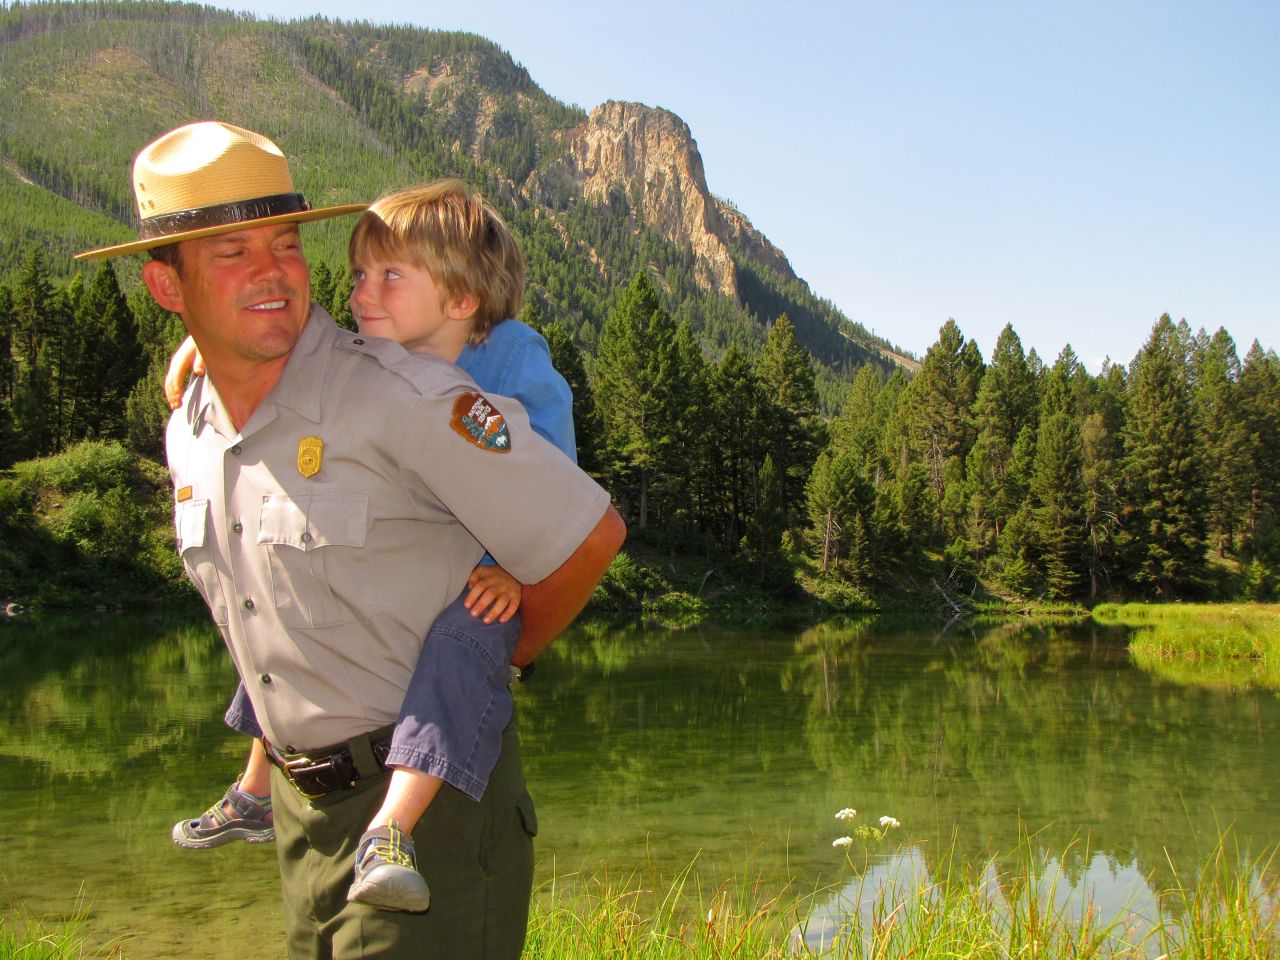 Meet our Yellowstone National Park ranger, Dan Hottle, and his 4-year-old son, Calder, shown here at Joffe Lake near the park's headquarters in Mammoth Hot Springs, Wyoming.